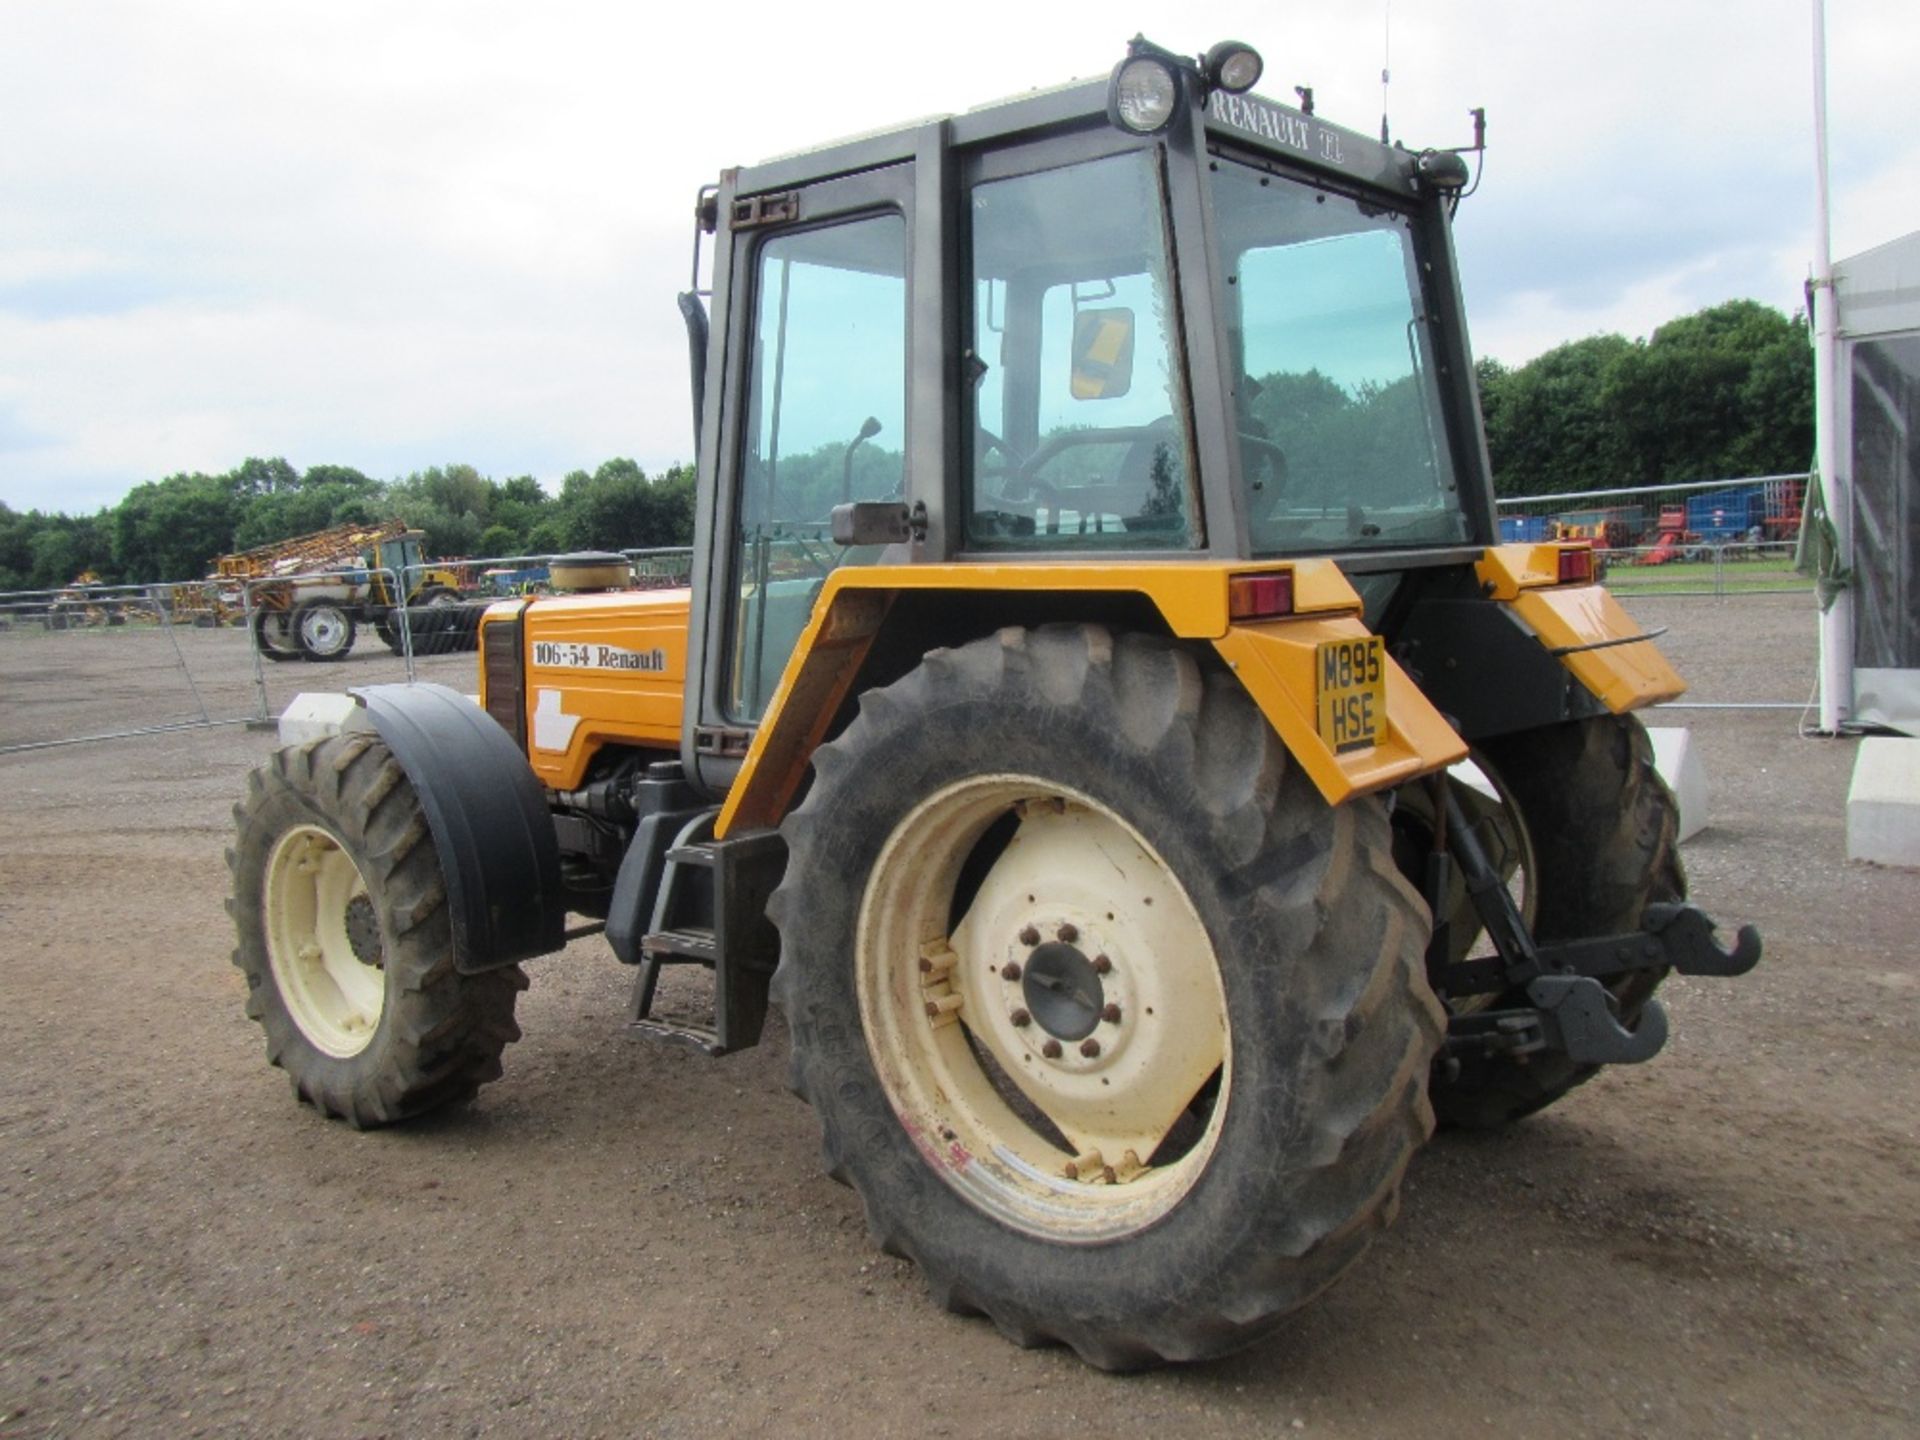 Renault 106-54 TL 4wd Tractor c/w 40k transmission, front weights Reg. No. M895 HSE - Image 10 of 18